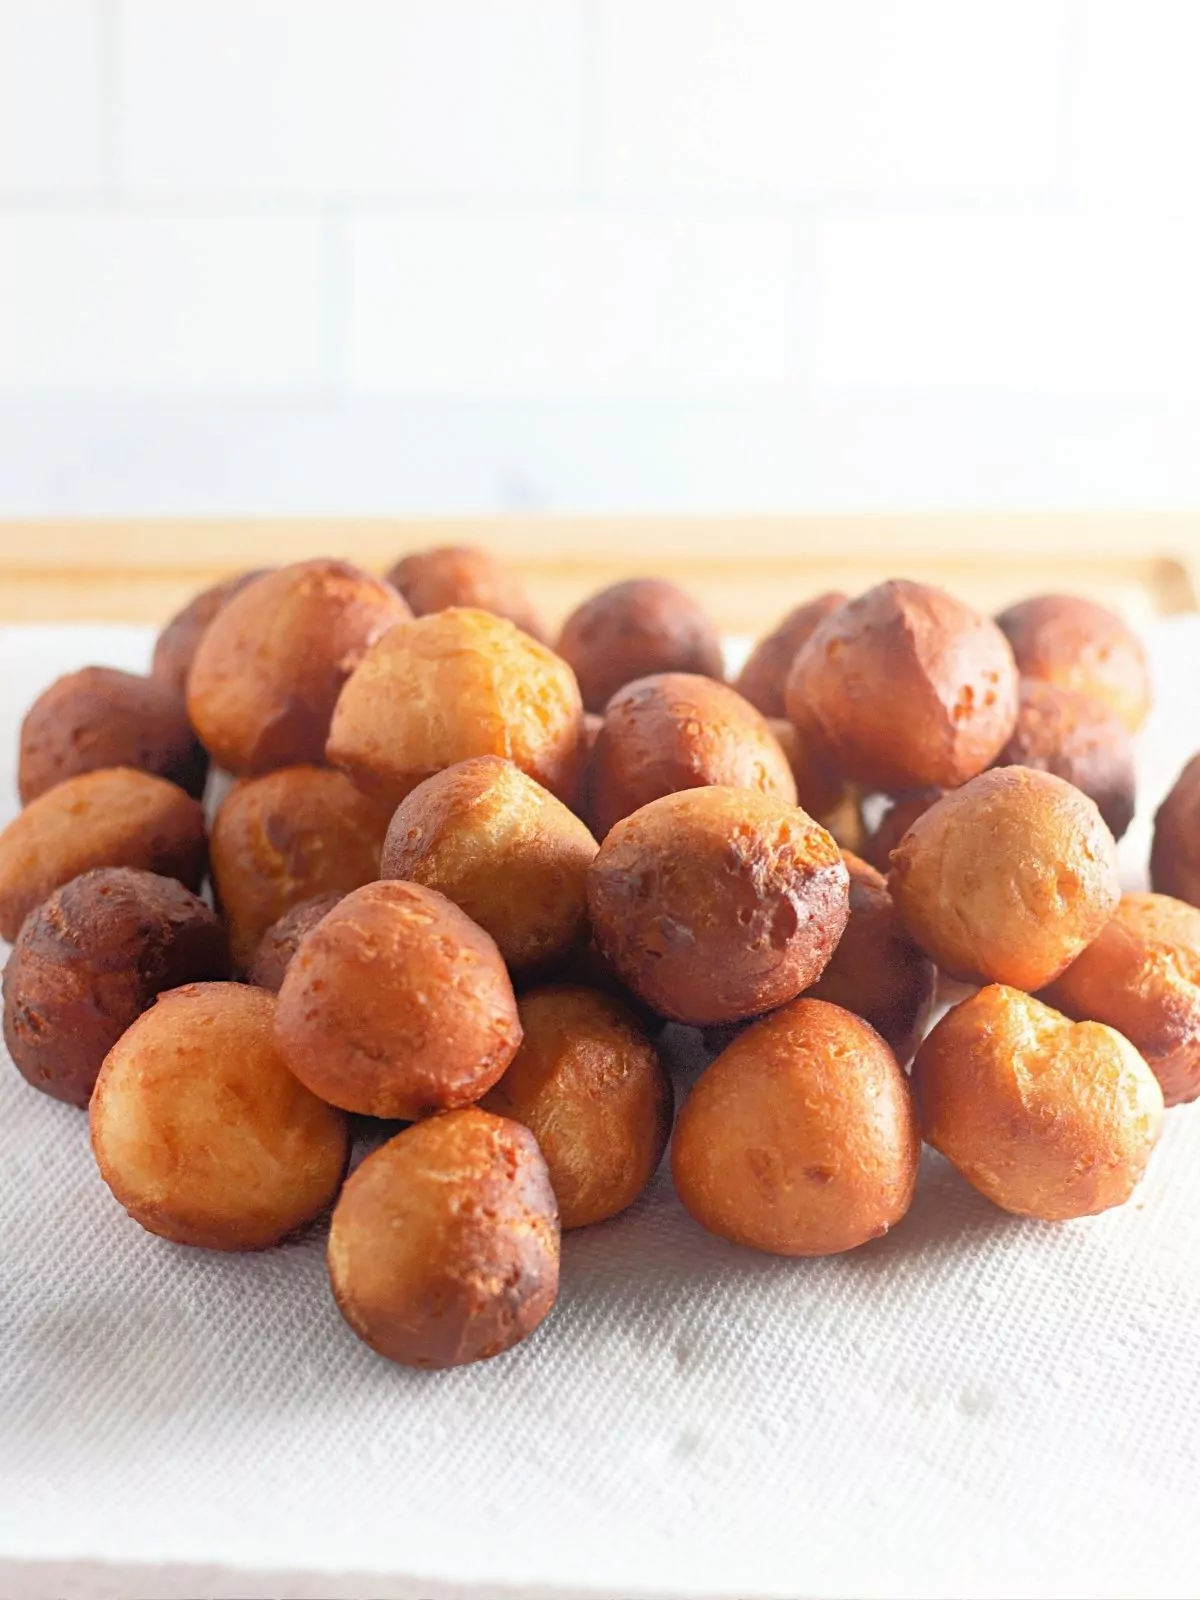 donut holes on paper towel.